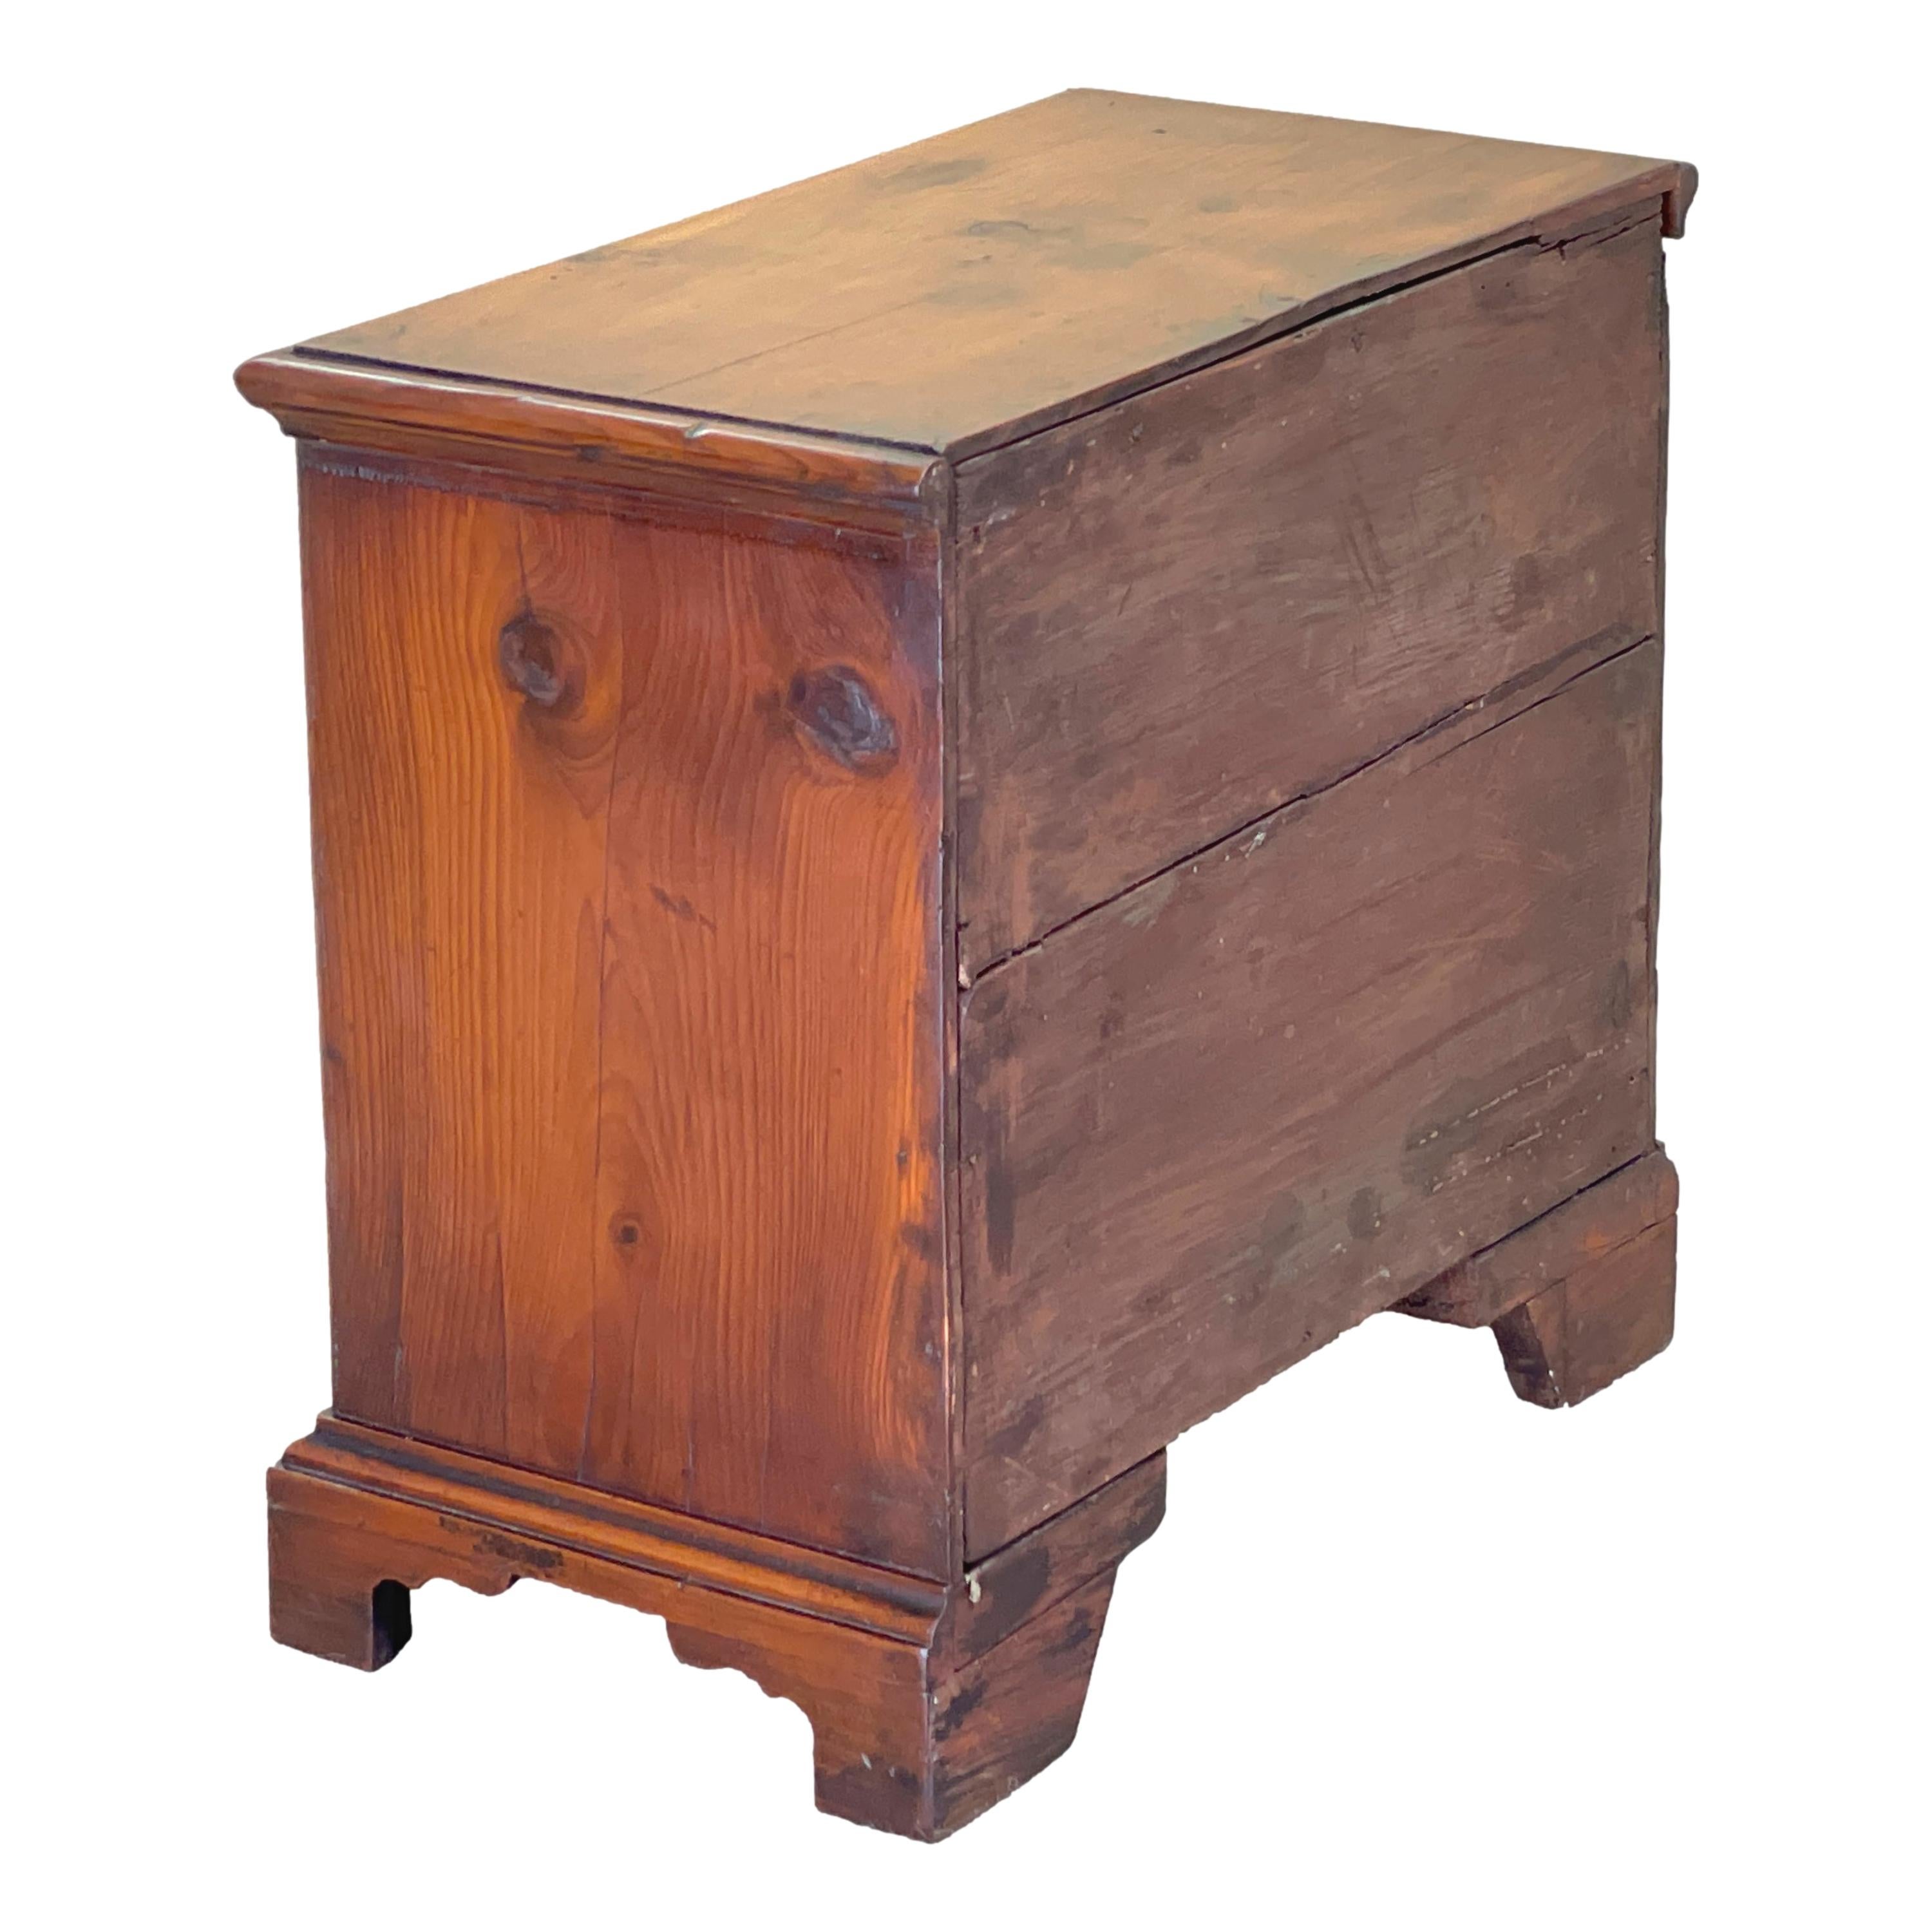 Georgian Yew Wood Miniature Chest of Drawers In Good Condition For Sale In Bedfordshire, GB